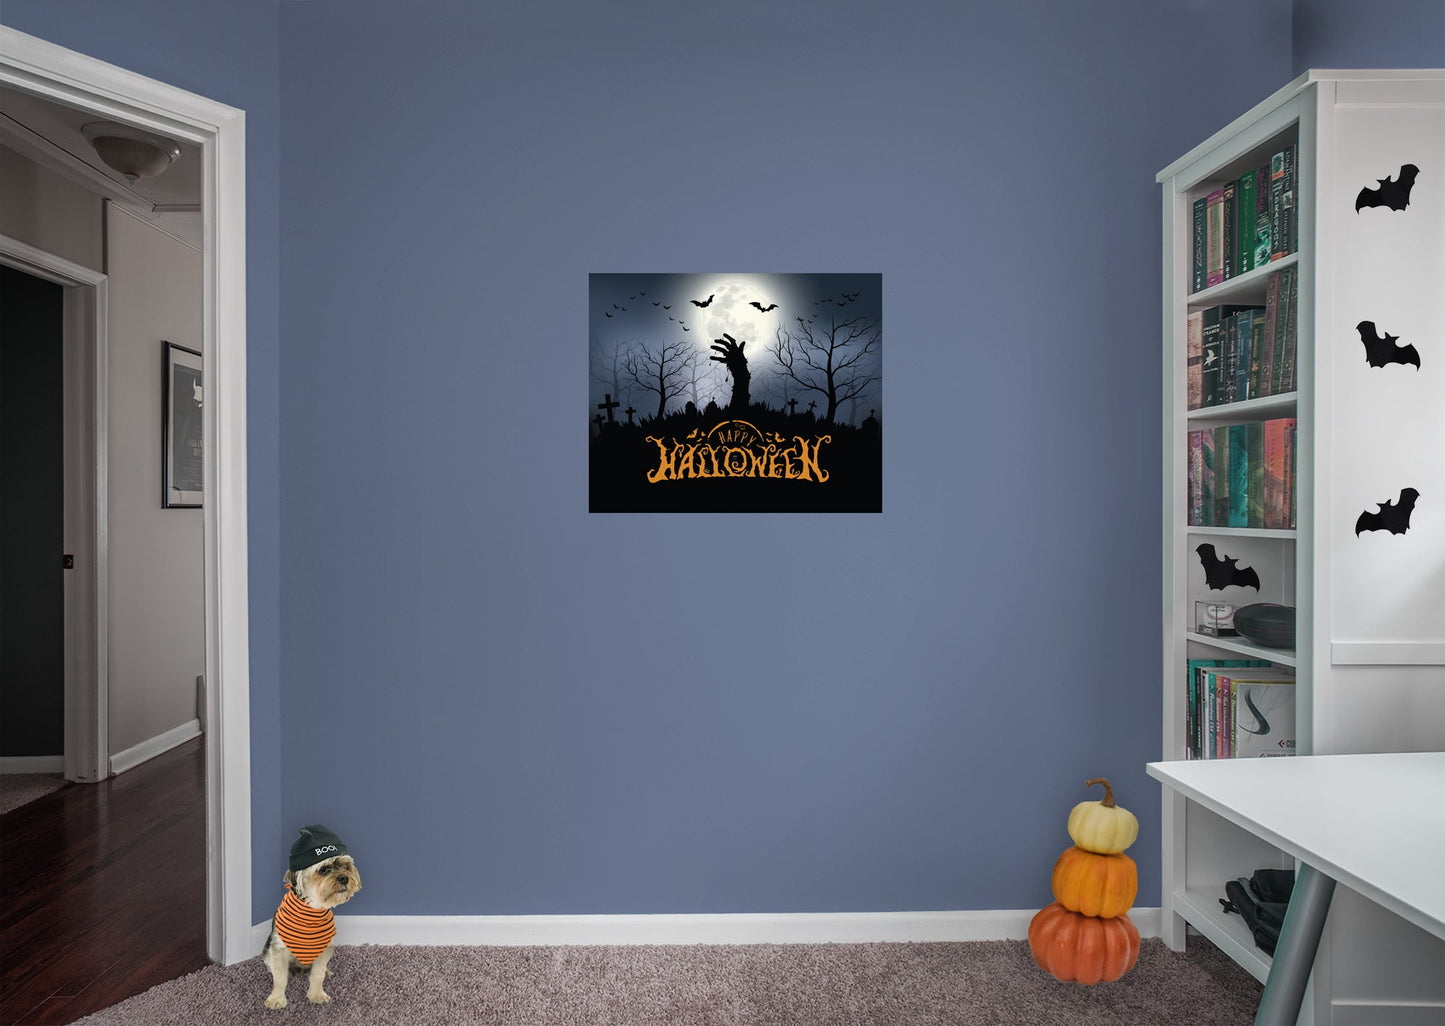 Halloween:  Zombie Hand Mural        -   Removable Wall   Adhesive Decal